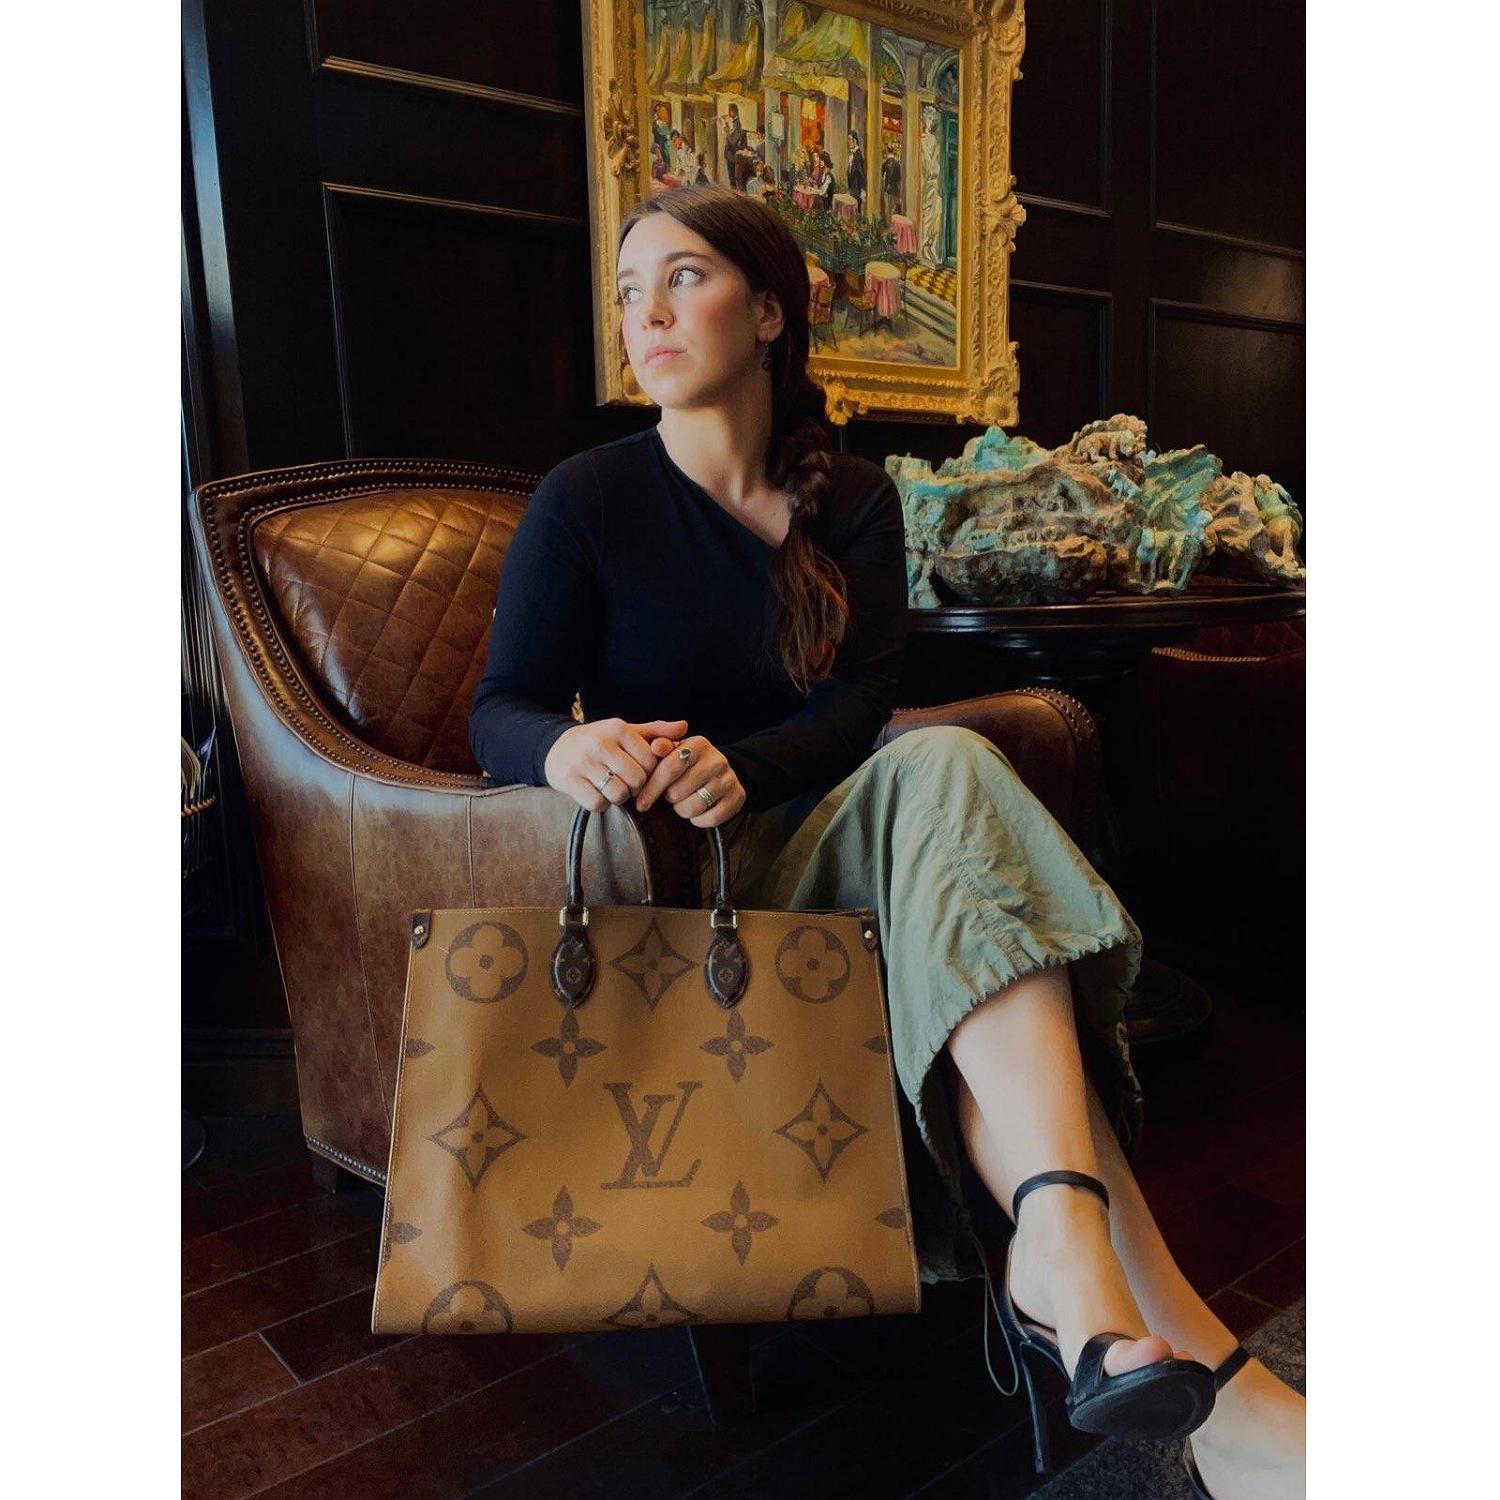 Fashioned from Monogram Giant canvas, the On The Go tote bag is as striking as it is practical. A Monogram Reverse pattern on the sides and handles creates a stylish contrast in color and scale. With its generous capacity, shoulder straps and iconic